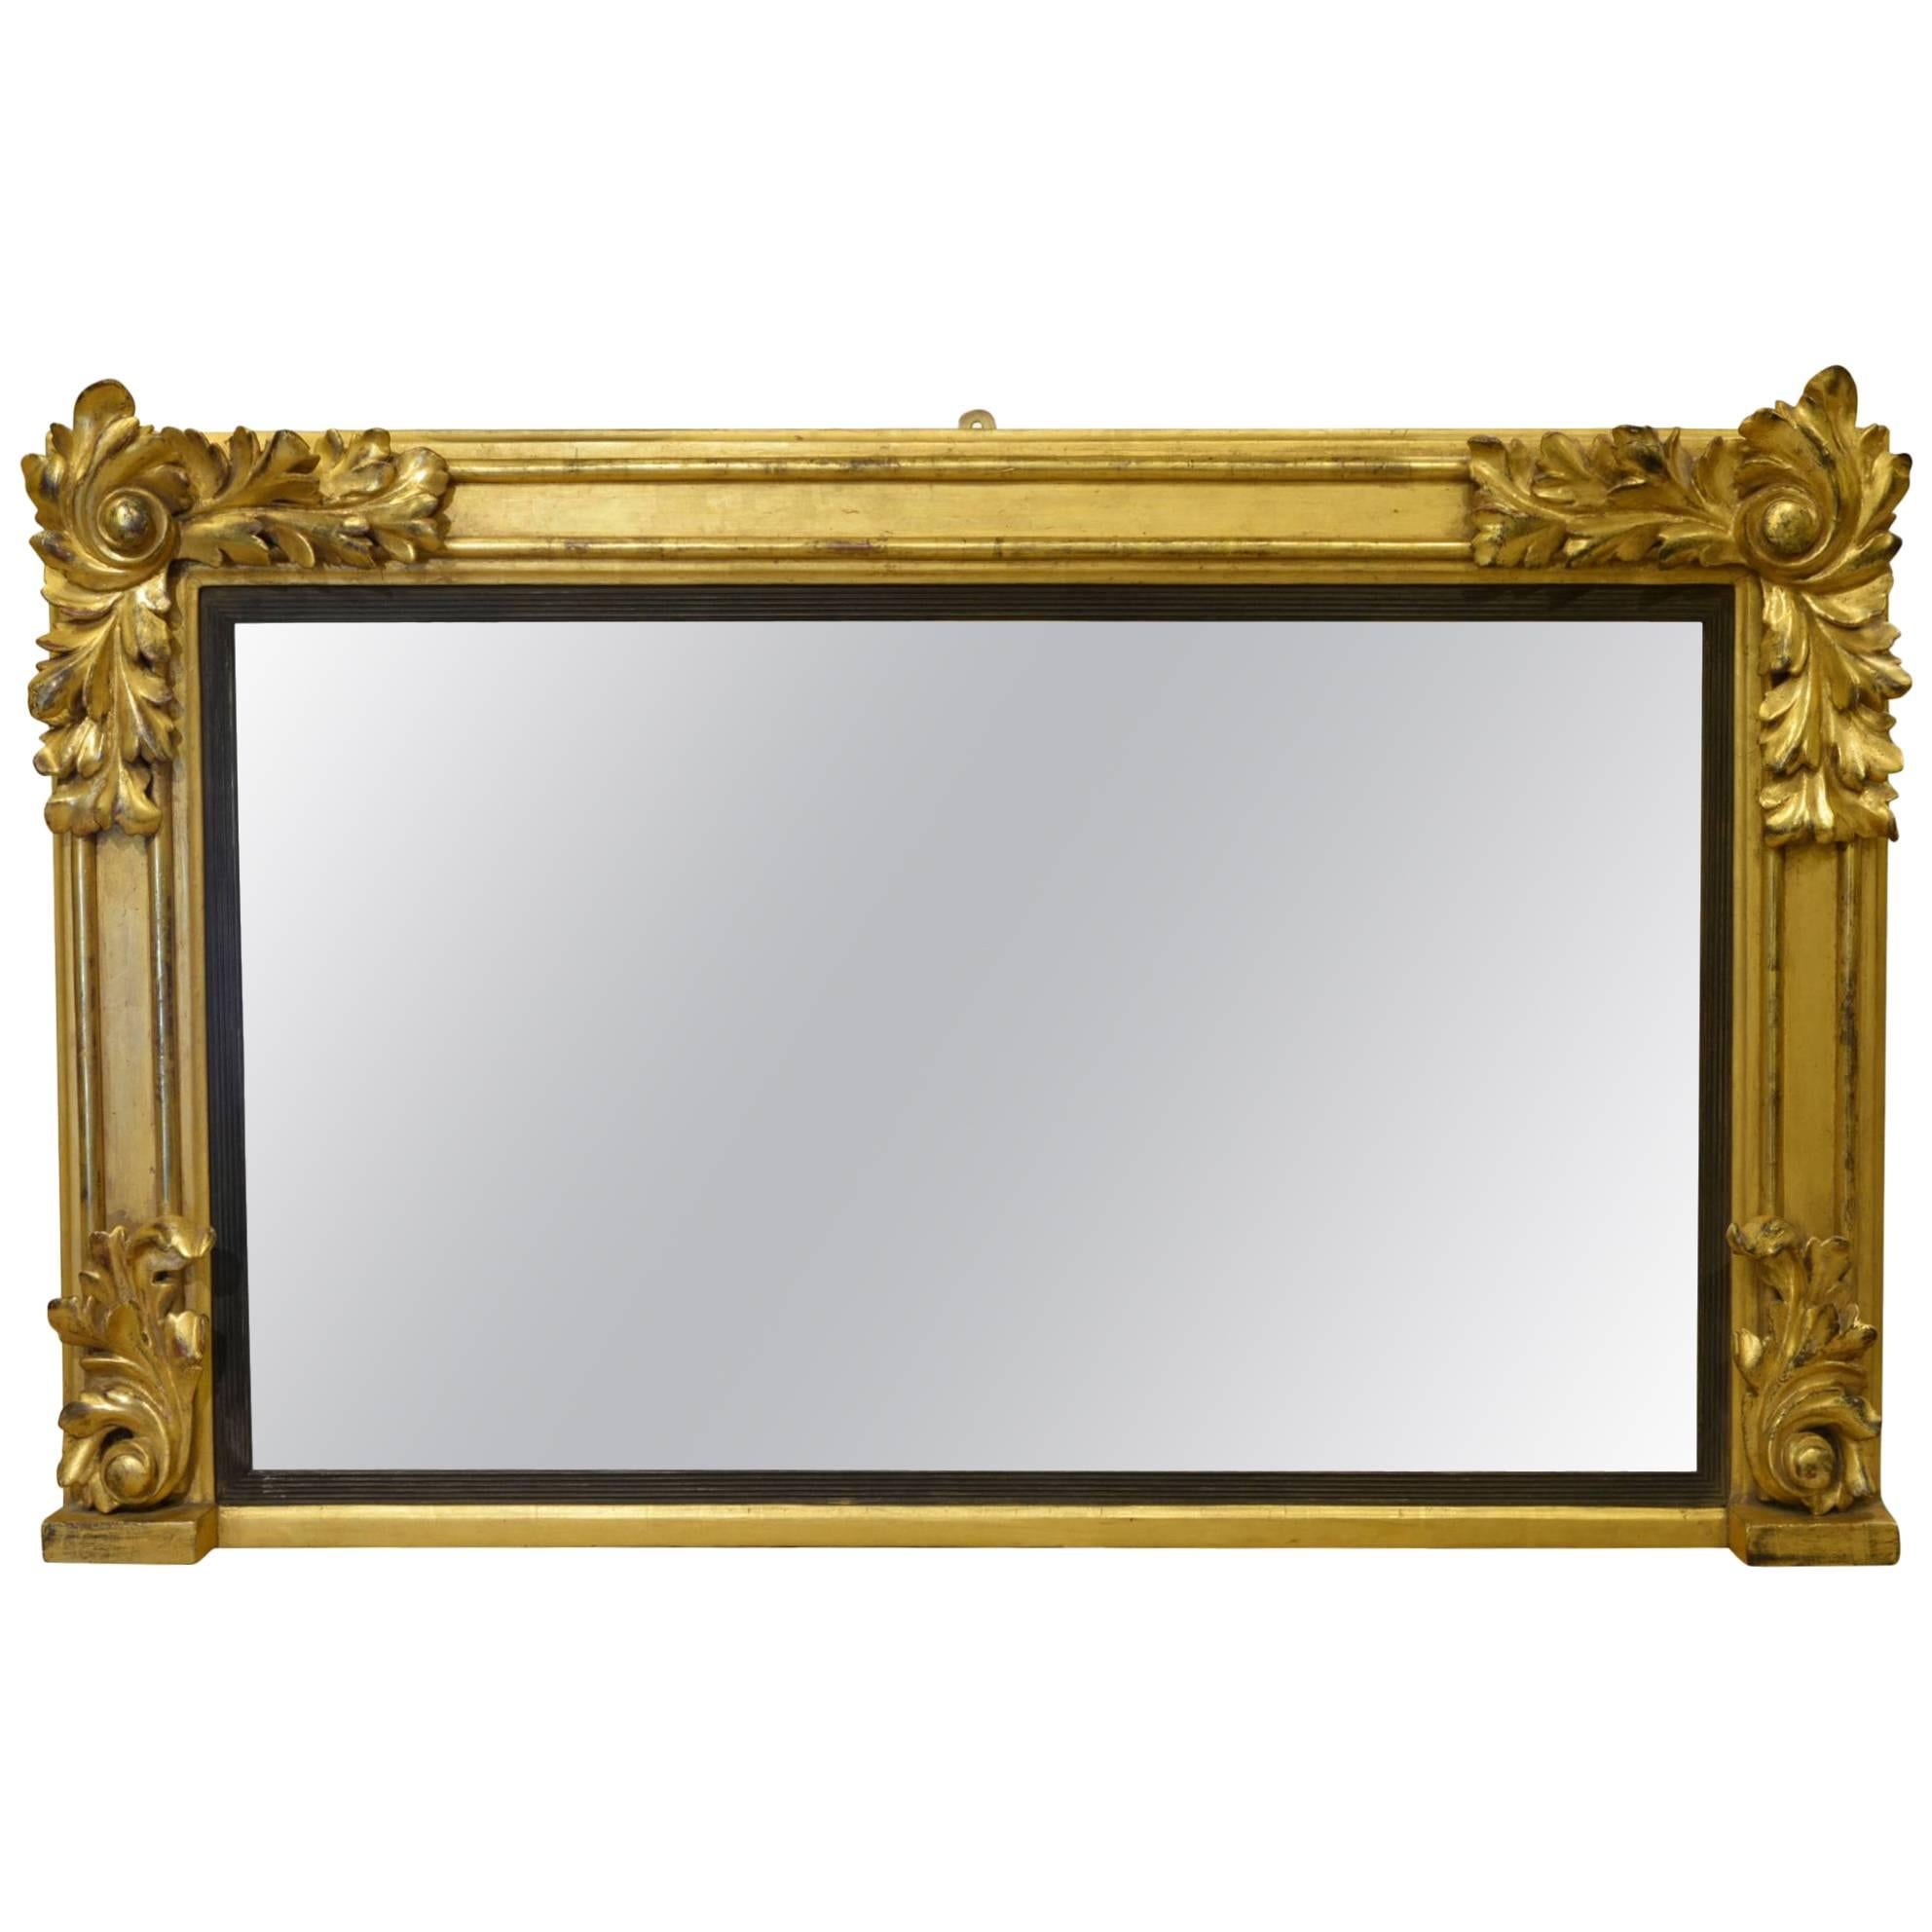 William iv Carved Wood and Gilt Overmantel Mirror